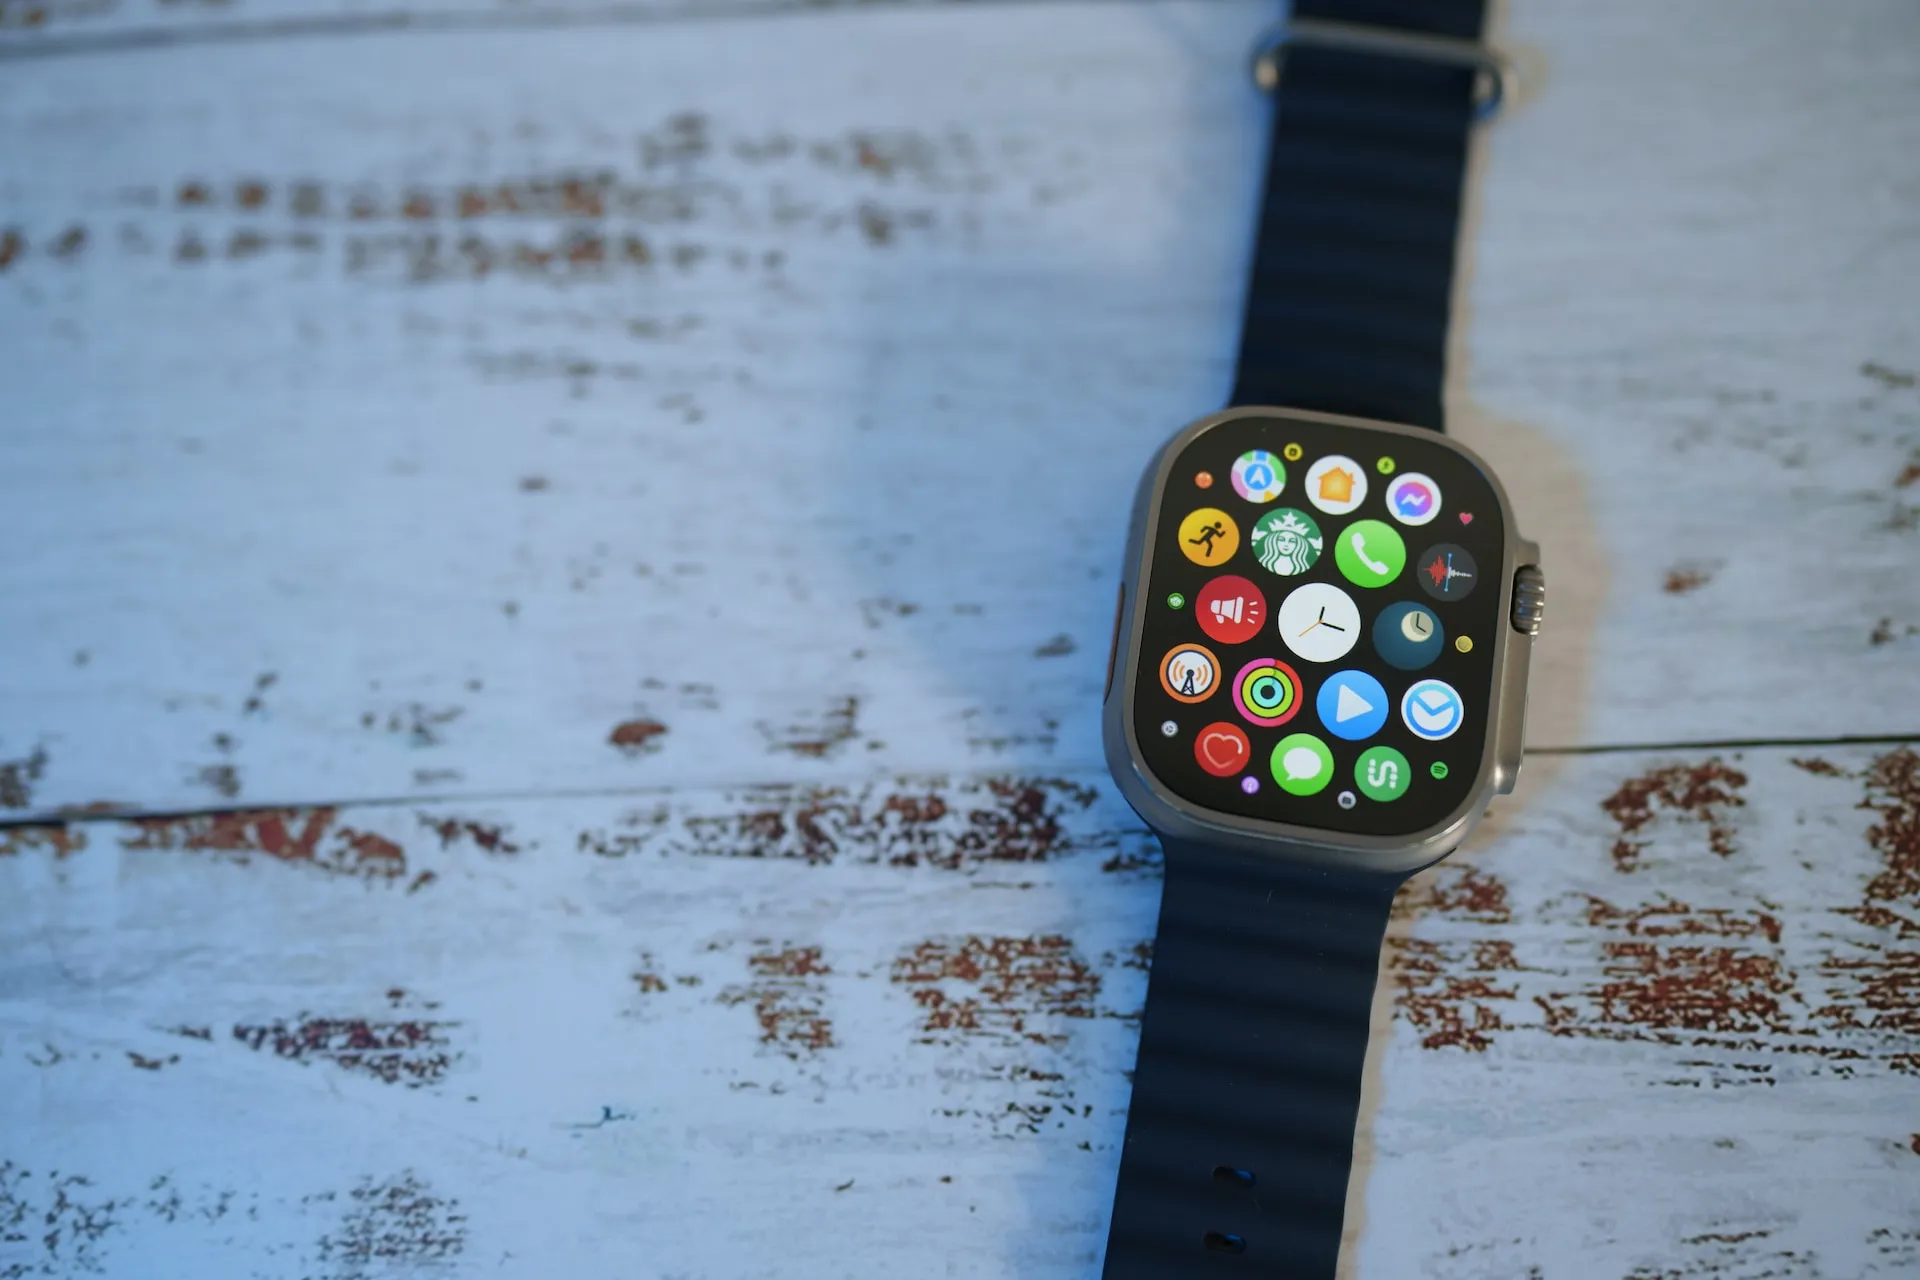 A modern Apple Watch, complete with a touch screen and various apps, is placed on a natural wooden table.